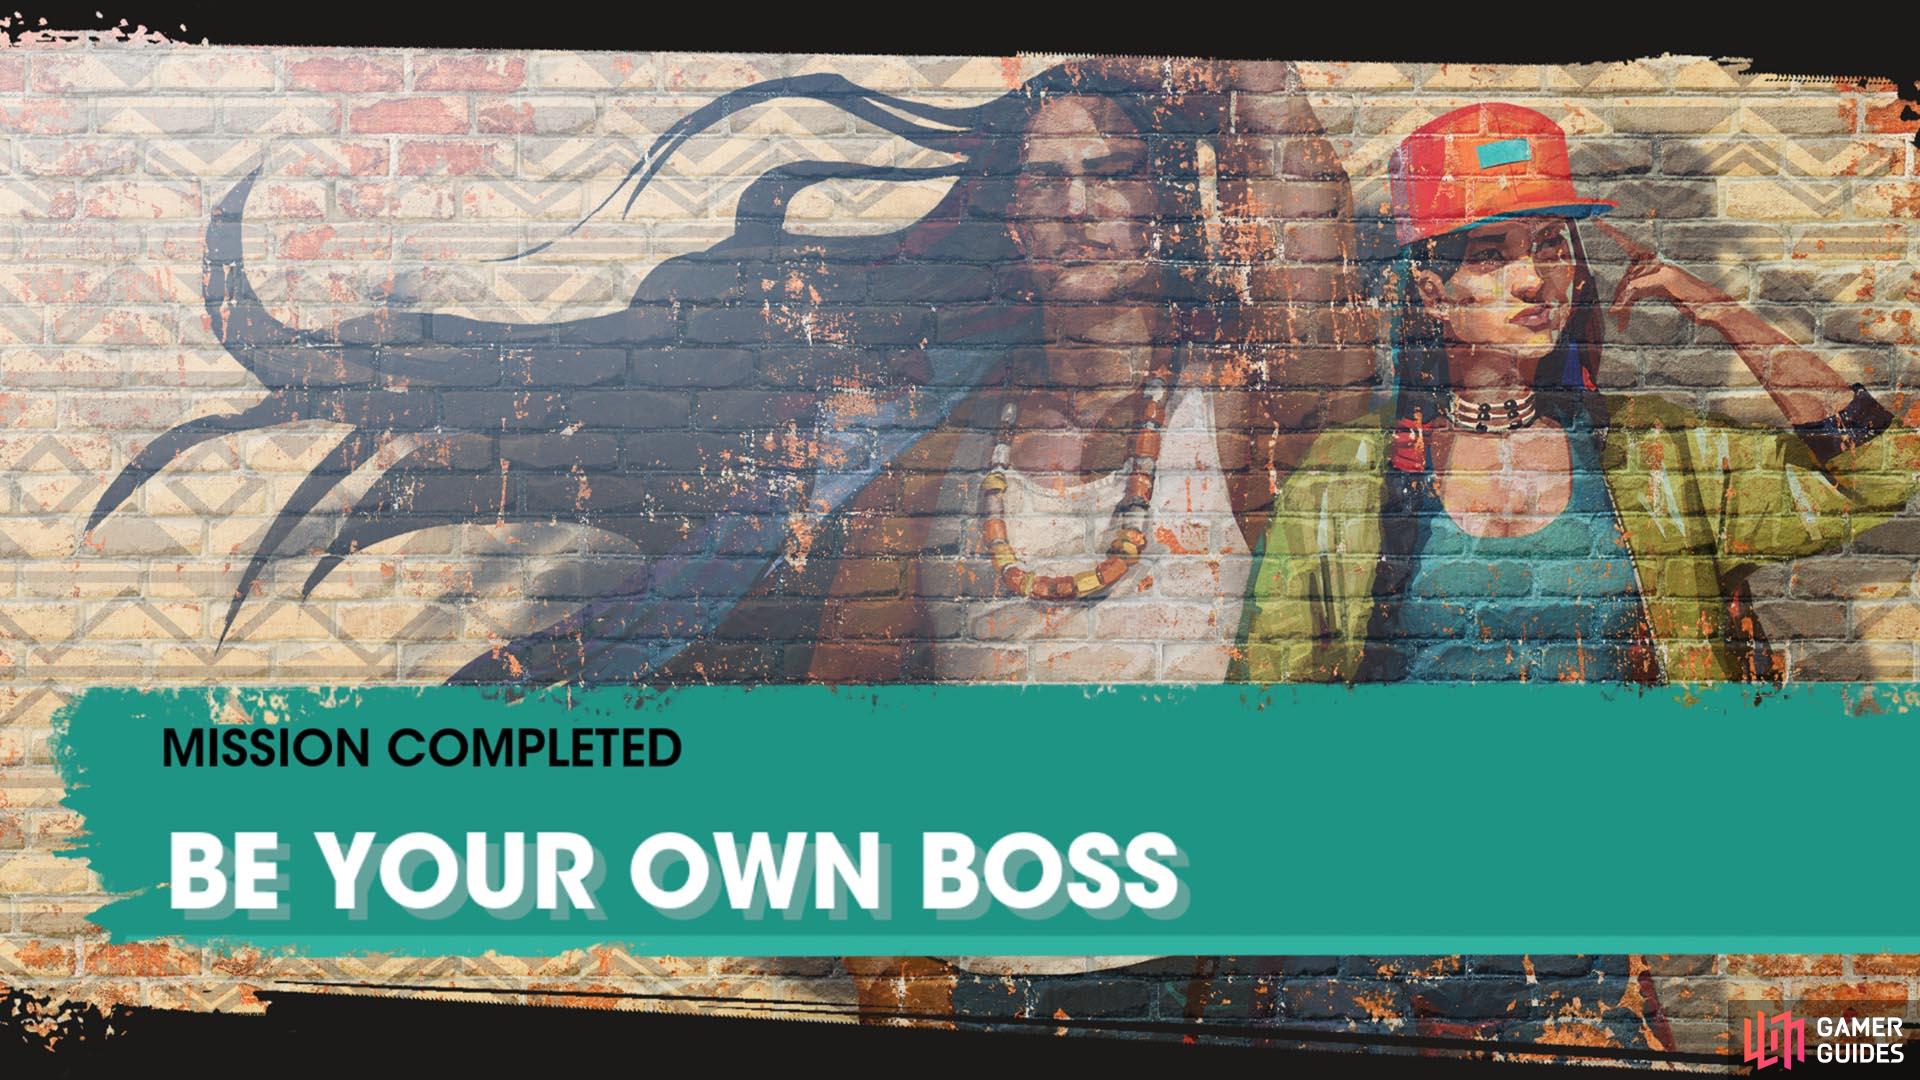 The road to taking on the other rival gangs and being your own boss is now totally open.